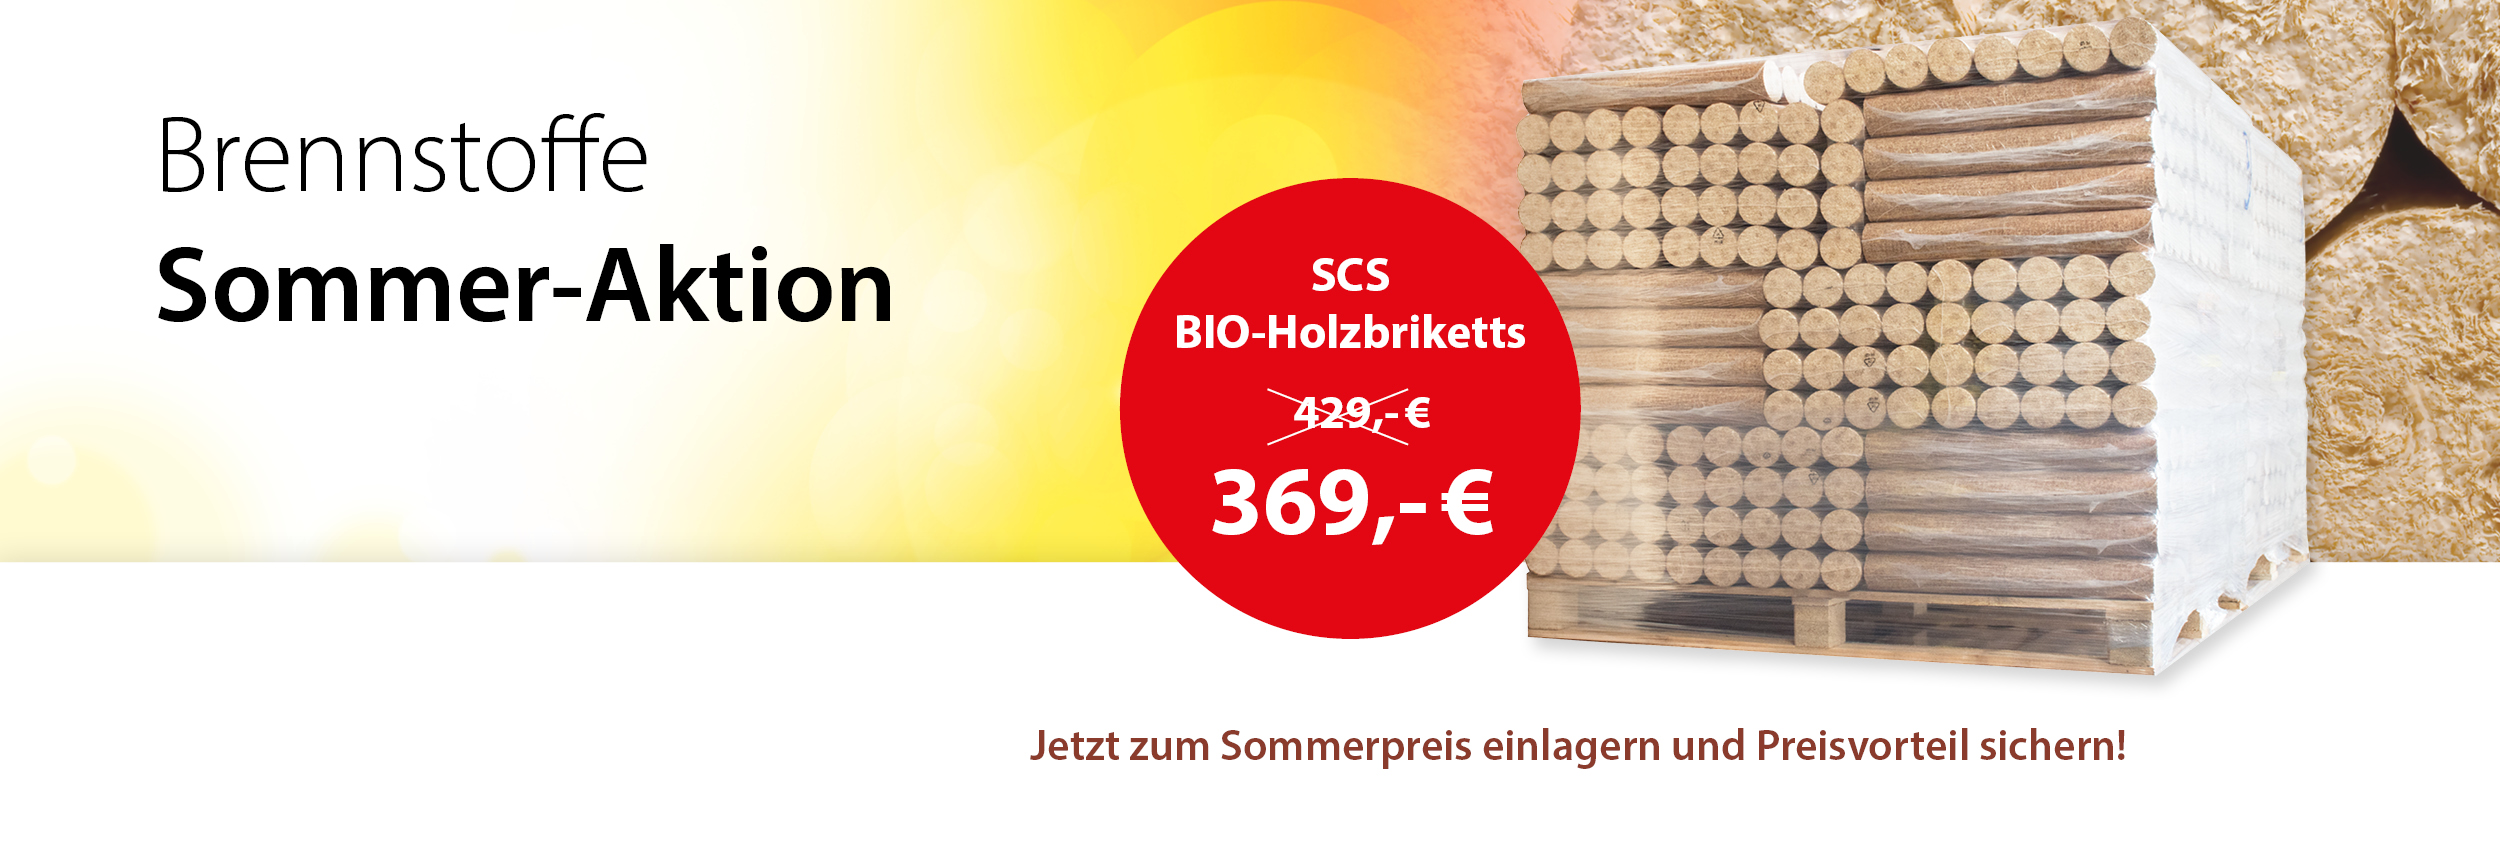 SCS Bio Holzbriketts Sommer-Aktion